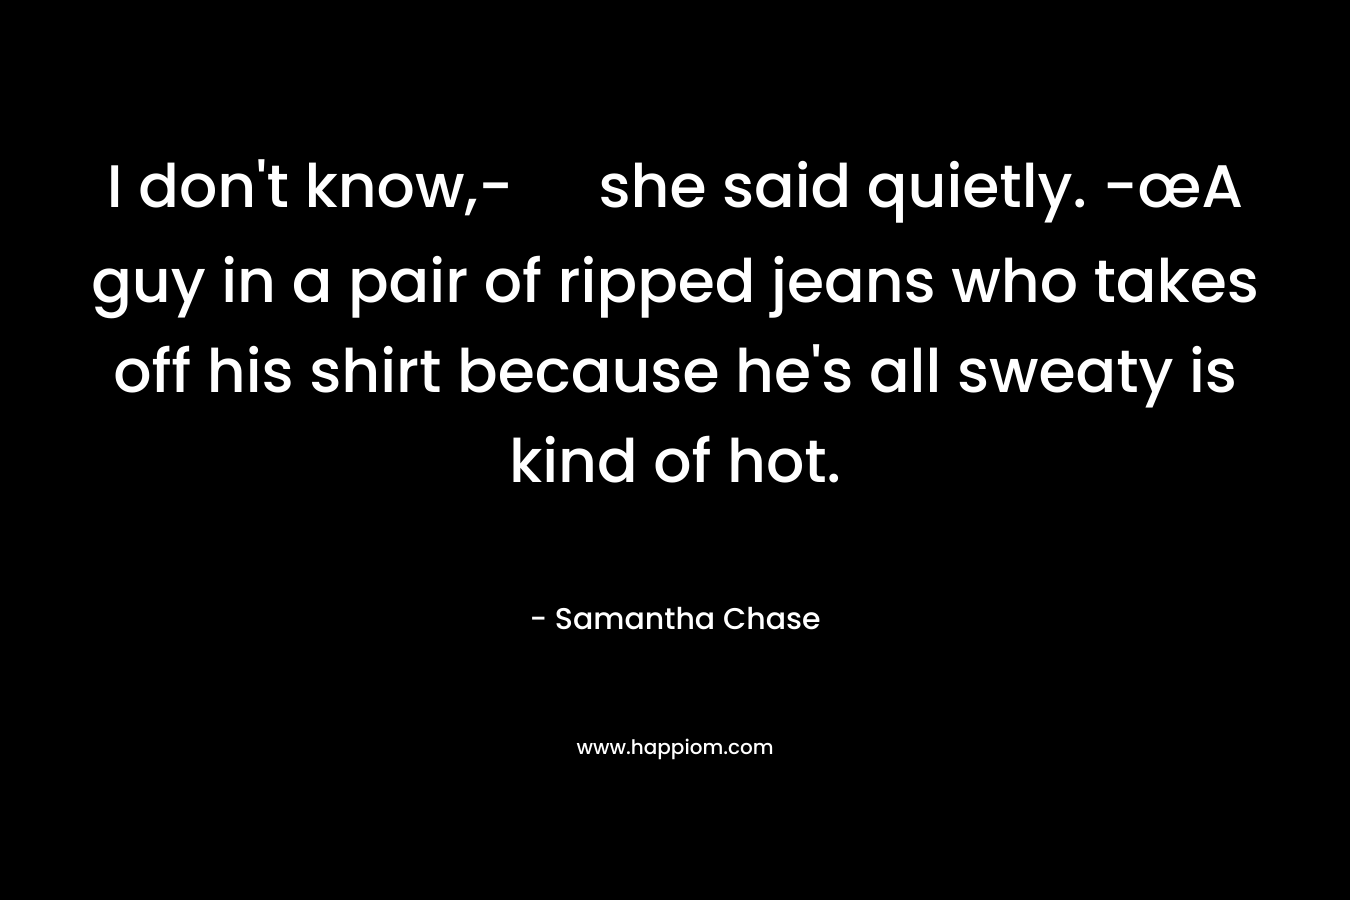 I don’t know,- she said quietly. -œA guy in a pair of ripped jeans who takes off his shirt because he’s all sweaty is kind of hot. – Samantha Chase